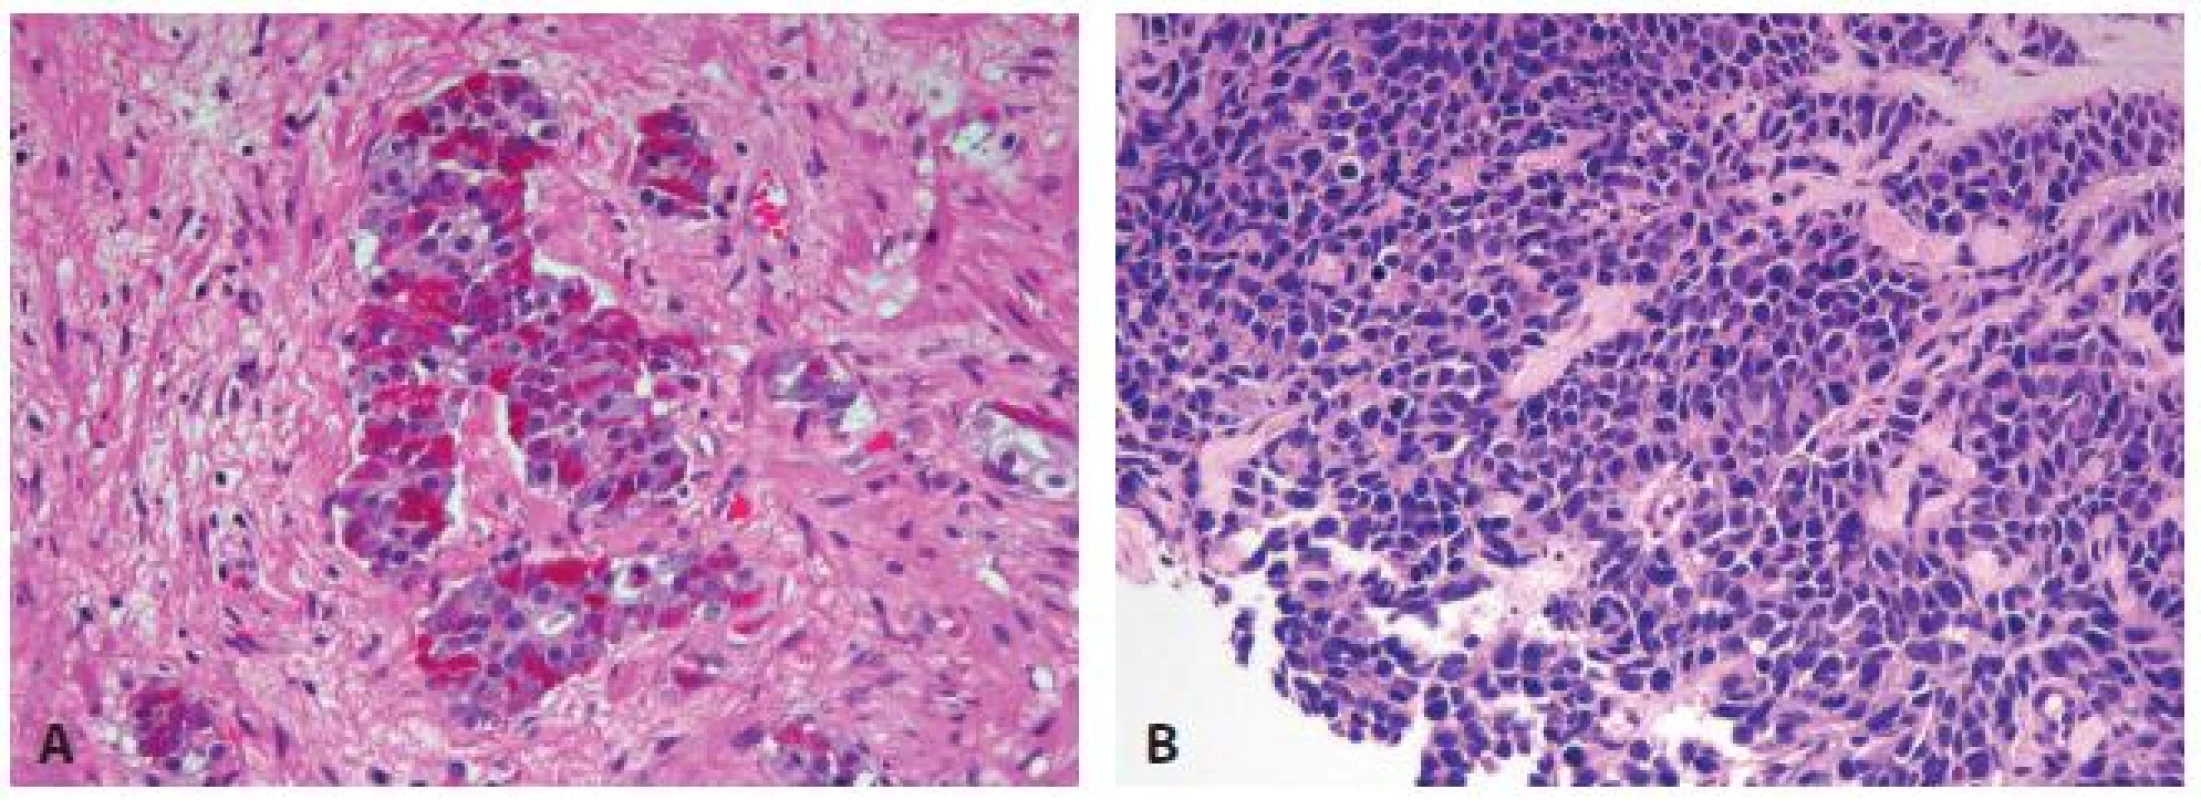 Prostate carcinoma with neuroendocrine differentiation. (A) Paneth cell-like NE differentiation. (B) Small cell carcinoma.